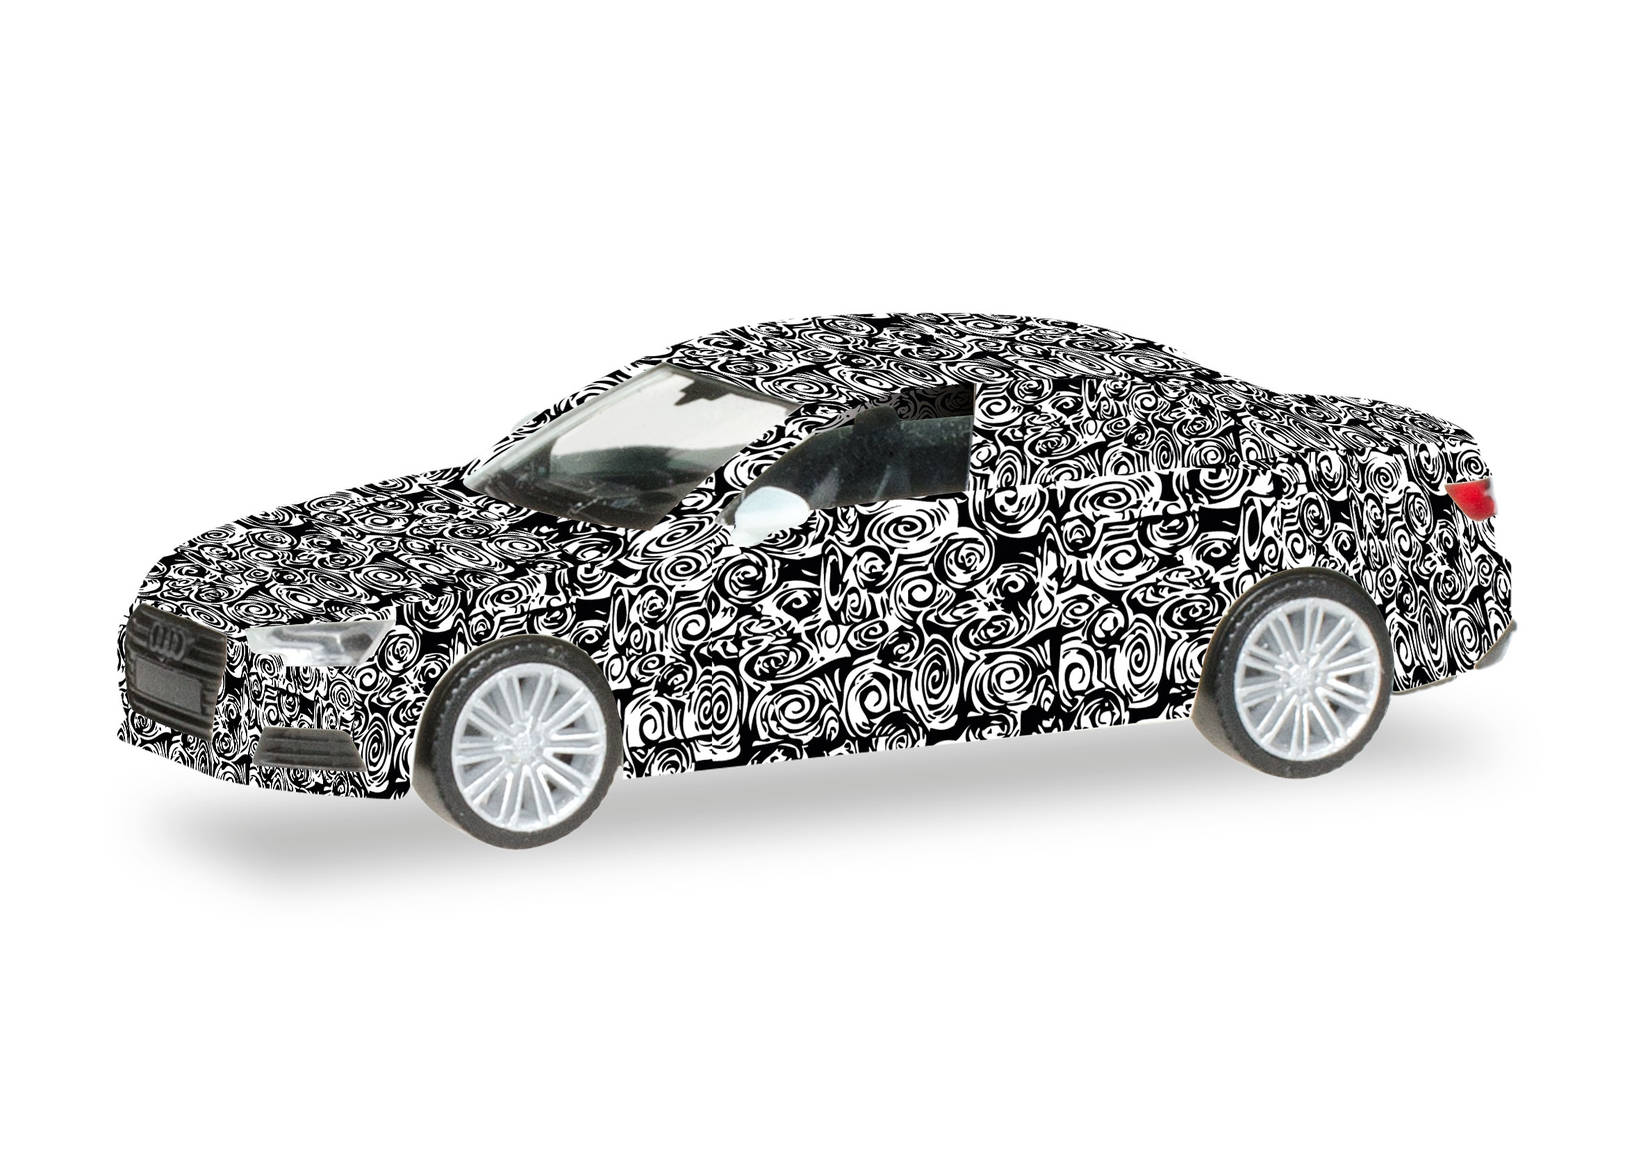 Audi A4 Limousine, with camouflage pattern